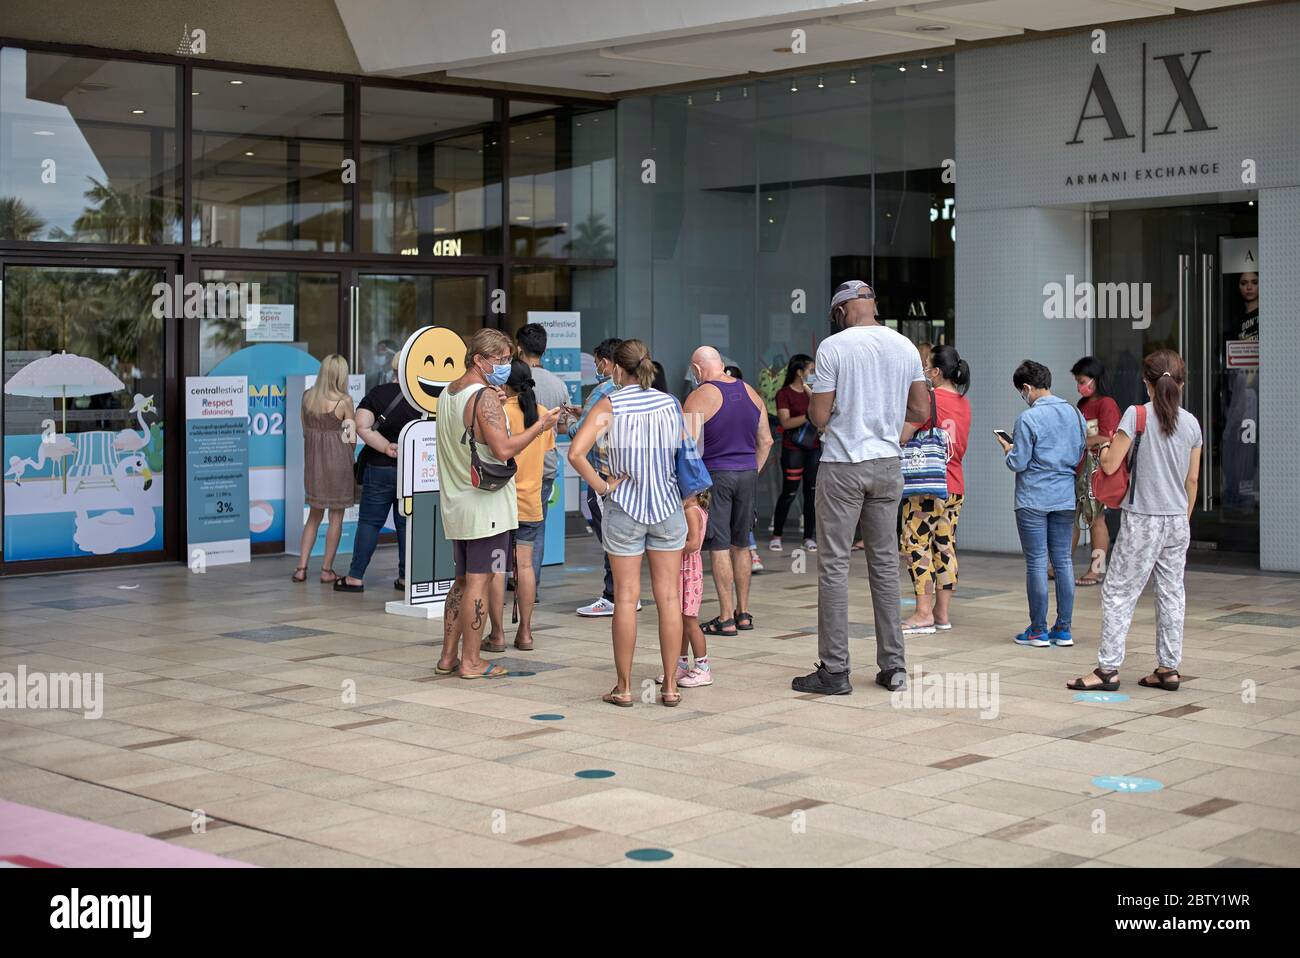 Social distancing failure. Covid-19 safety ignored as shoppers queue outside a shopping mall entrance. Stock Photo